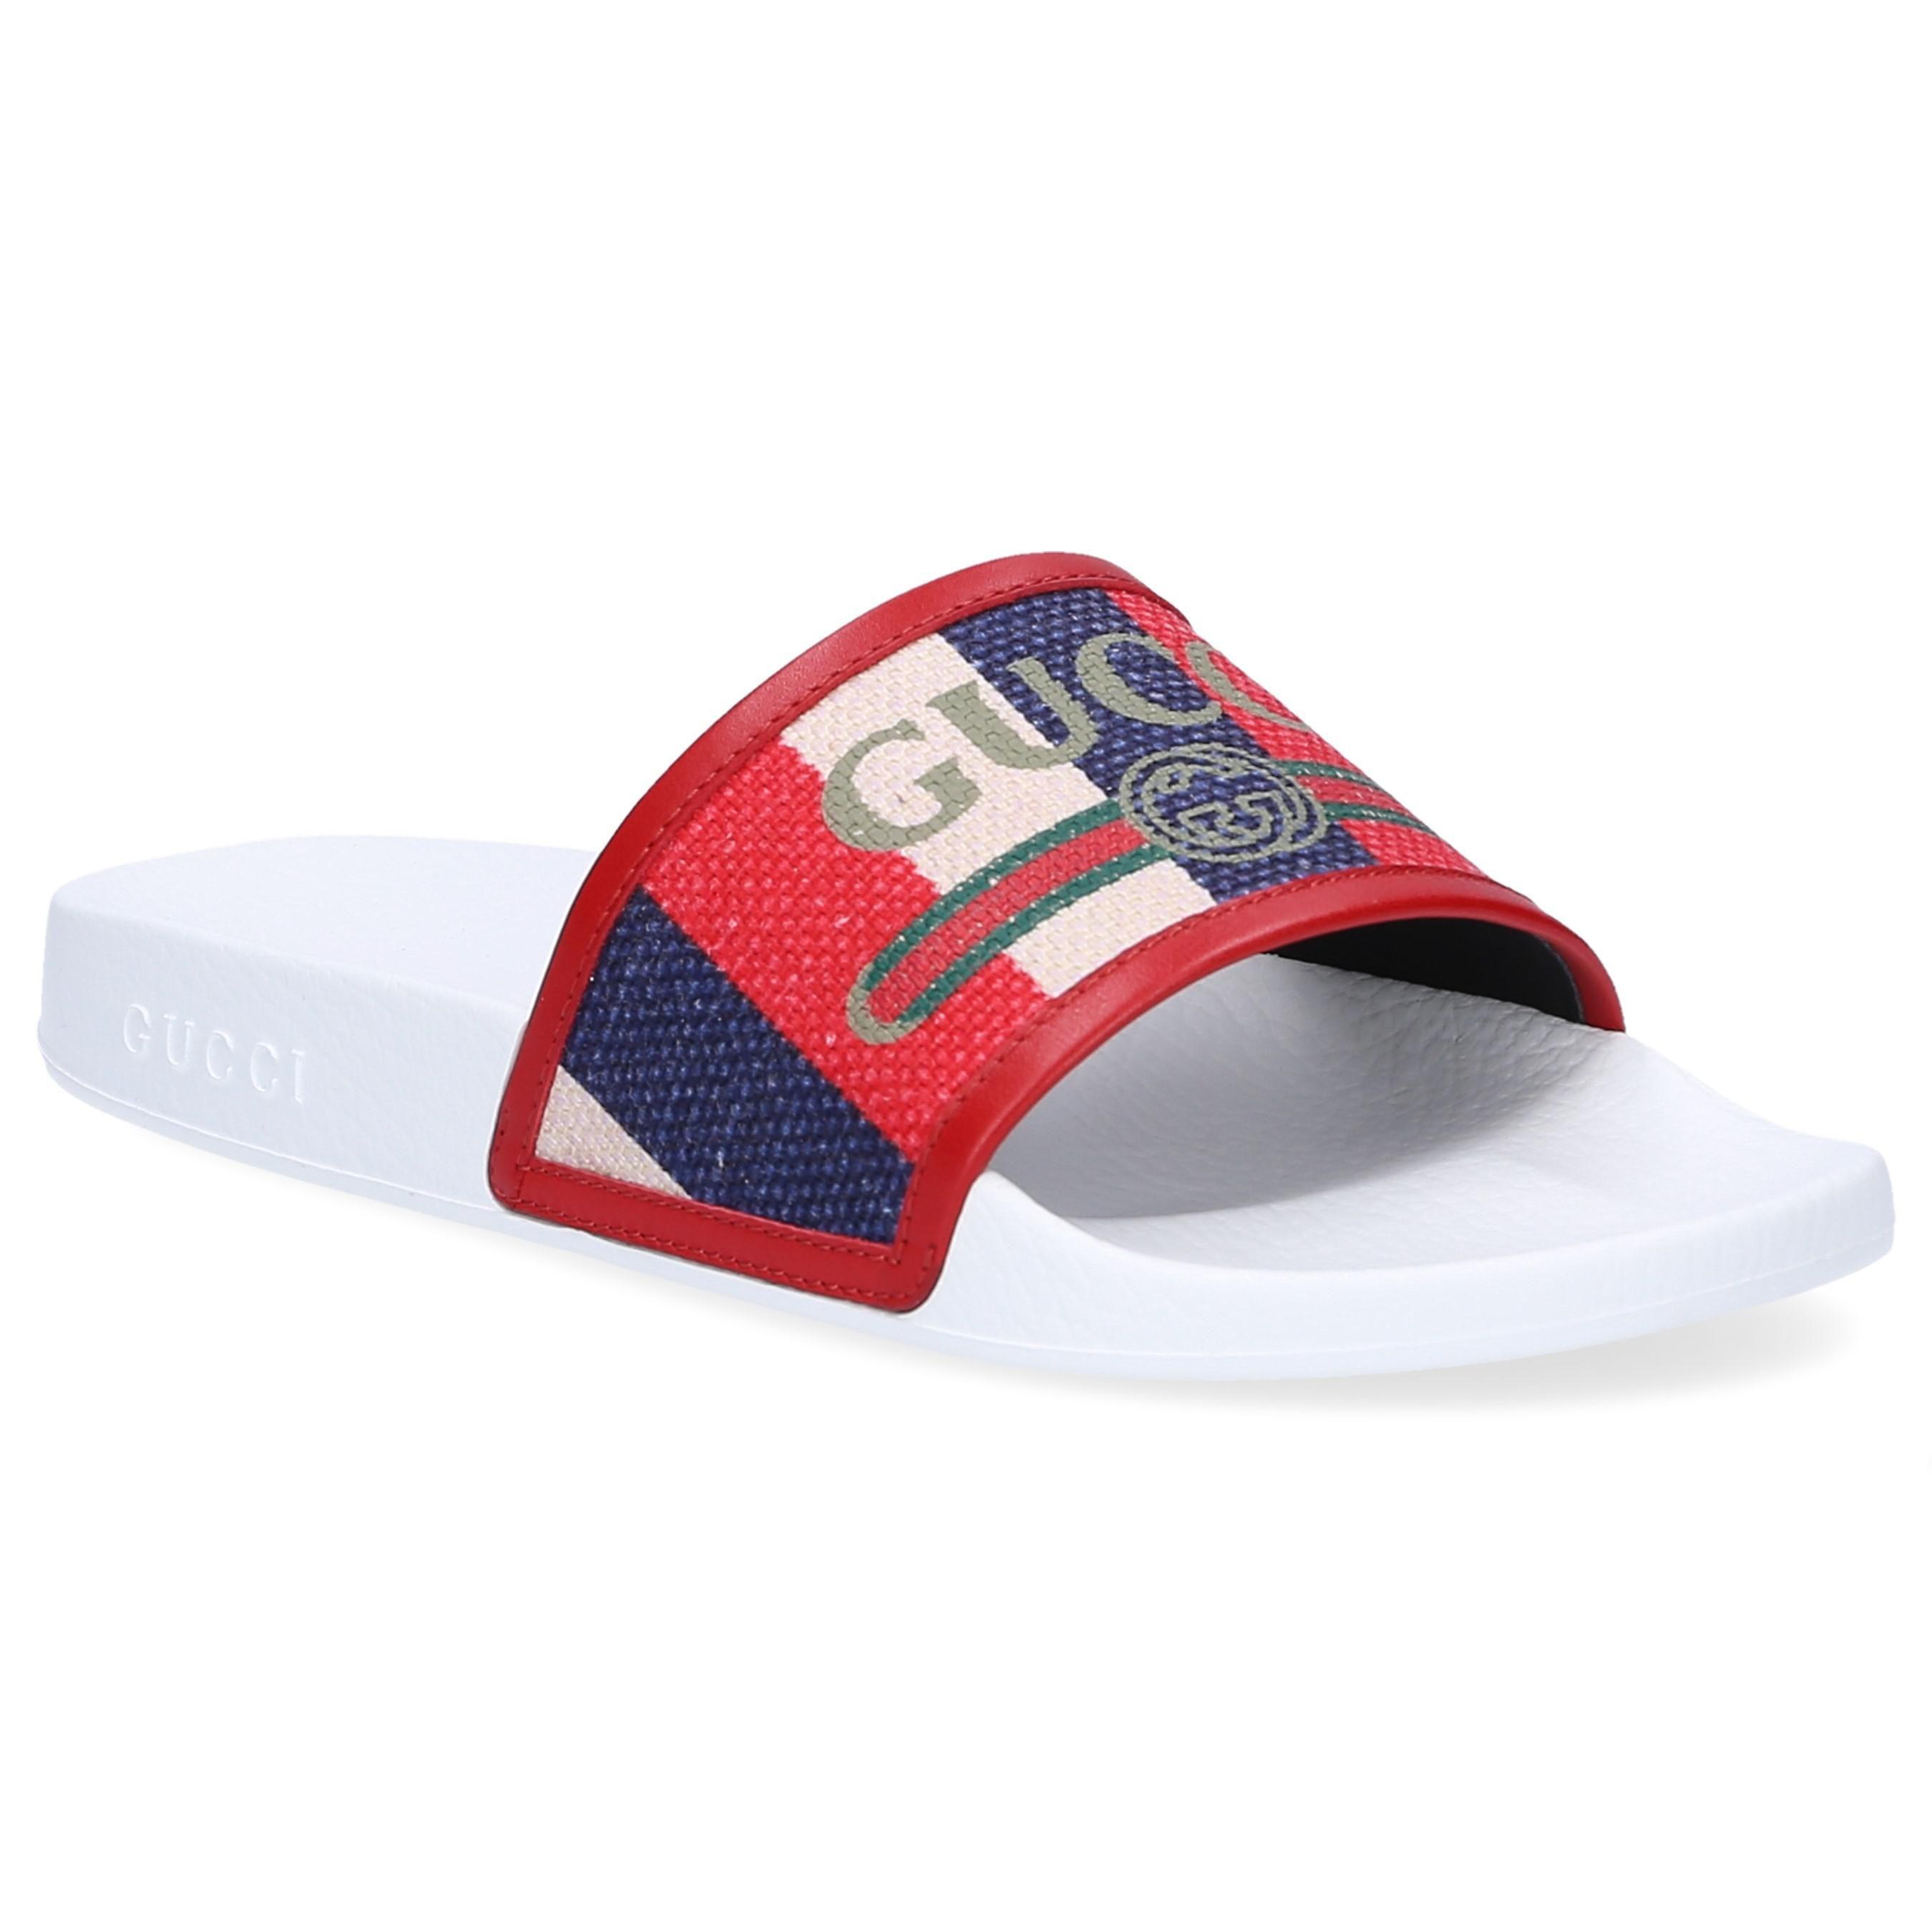 What Are Red Blue and White Logo - Gucci Mules Sylvie Calfskin Canvas Gum Logo Used Blue Red White in ...